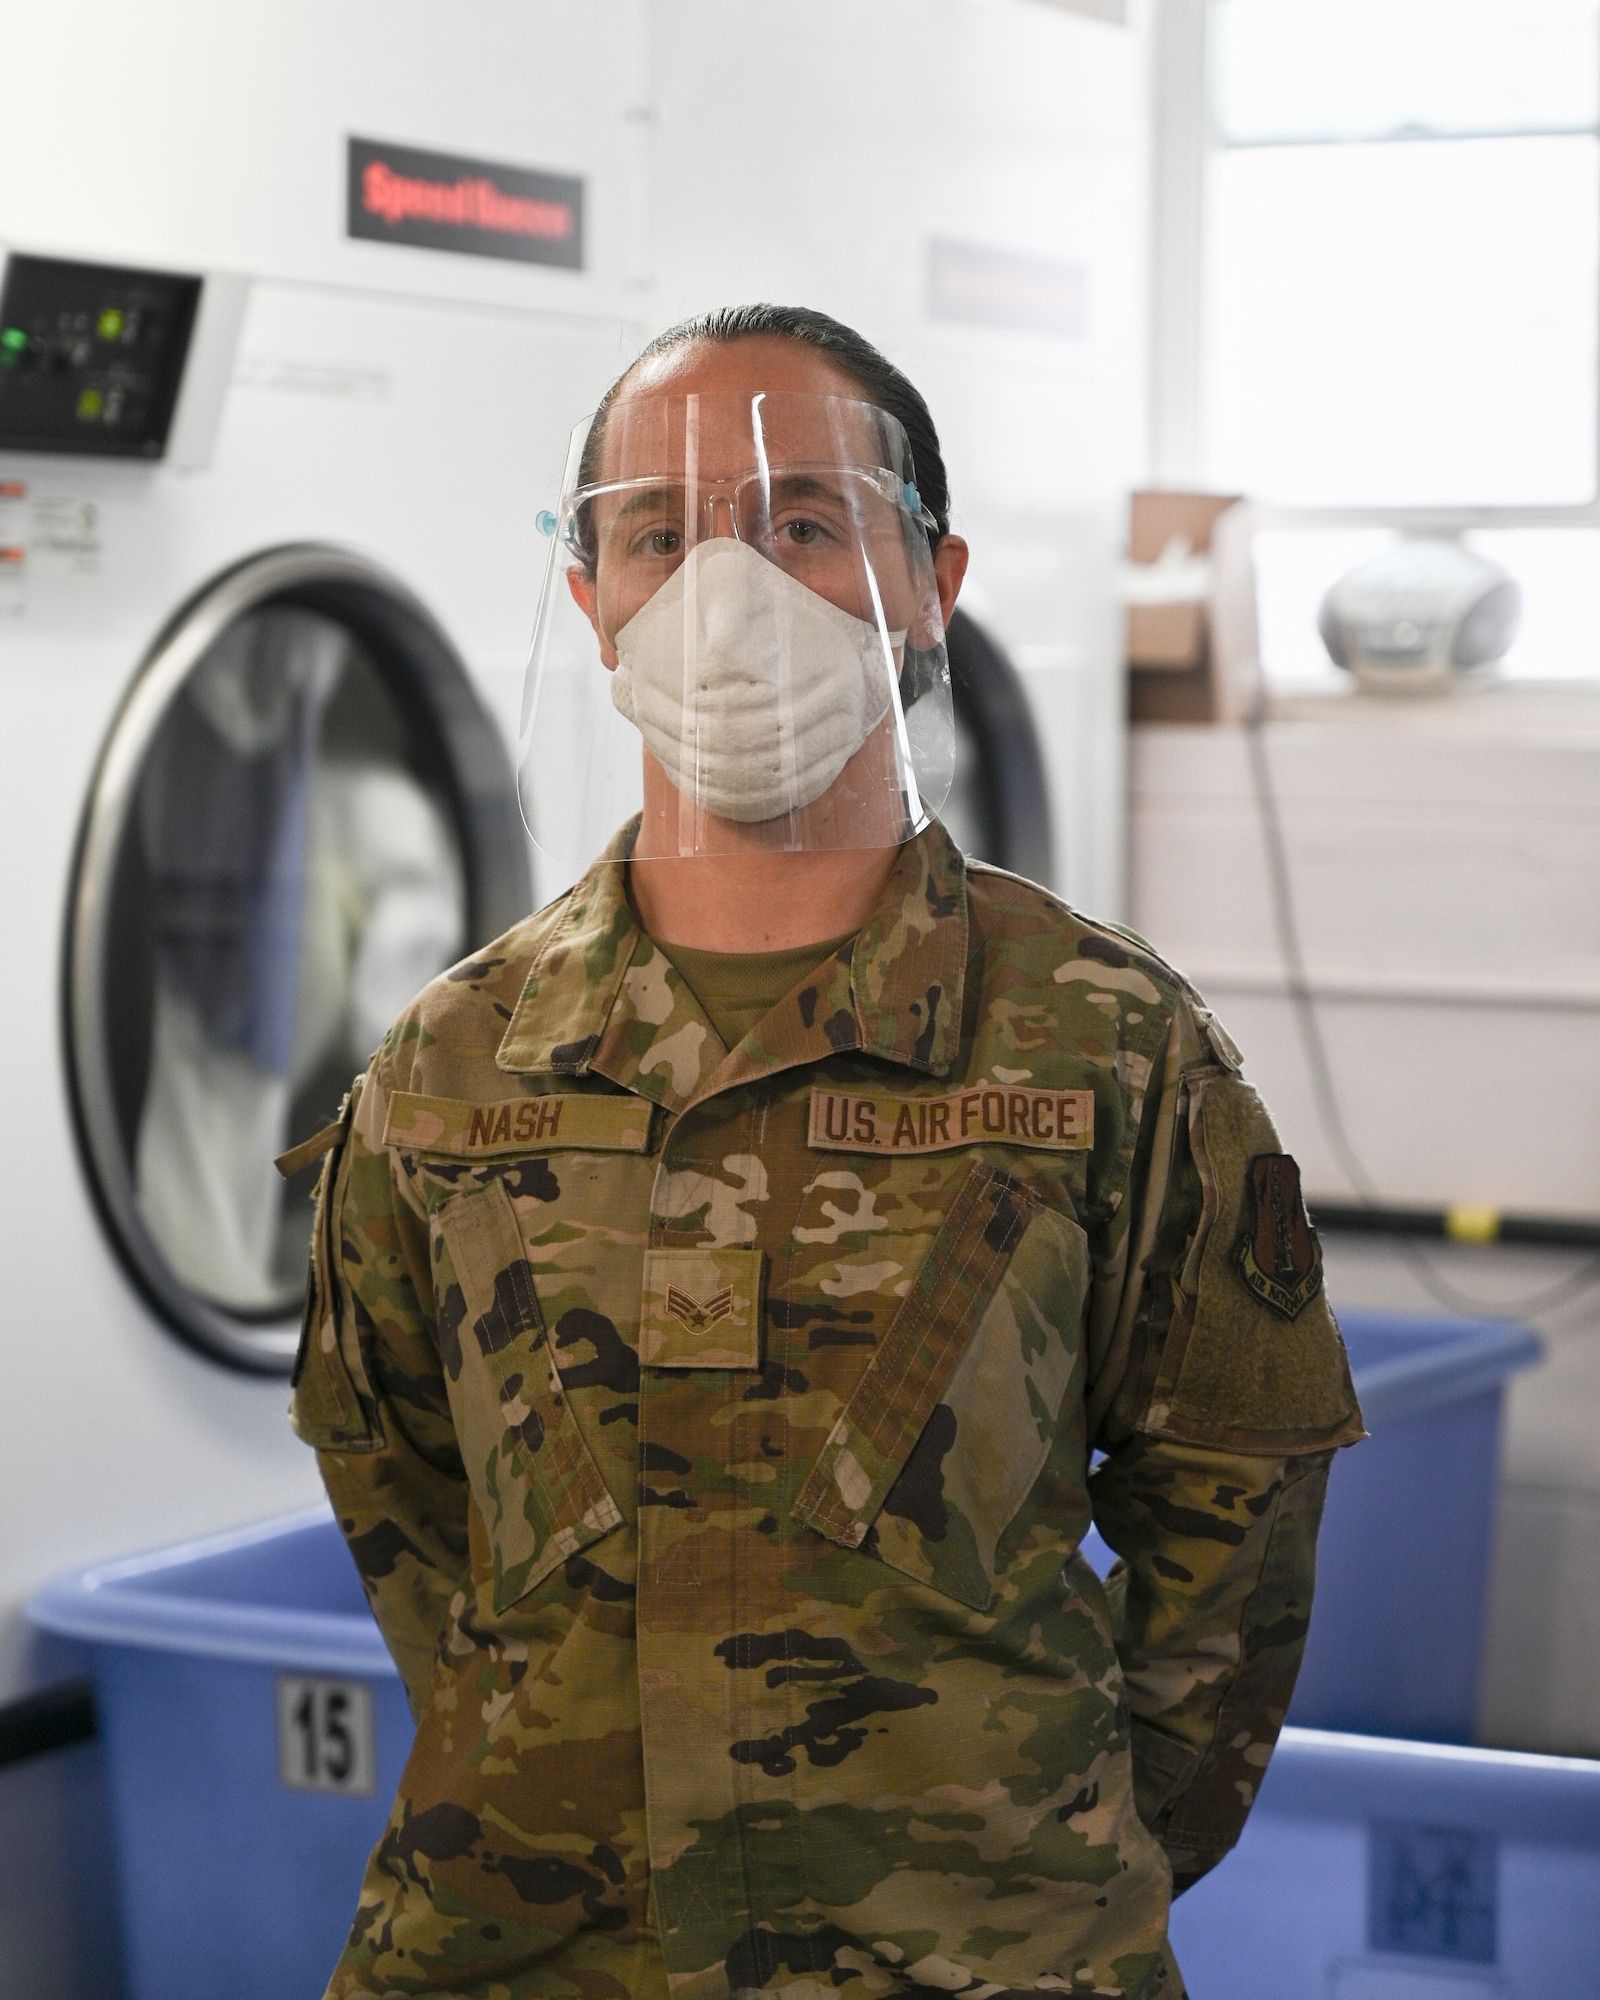 Senior airman Jessica Nash stands in washing room.